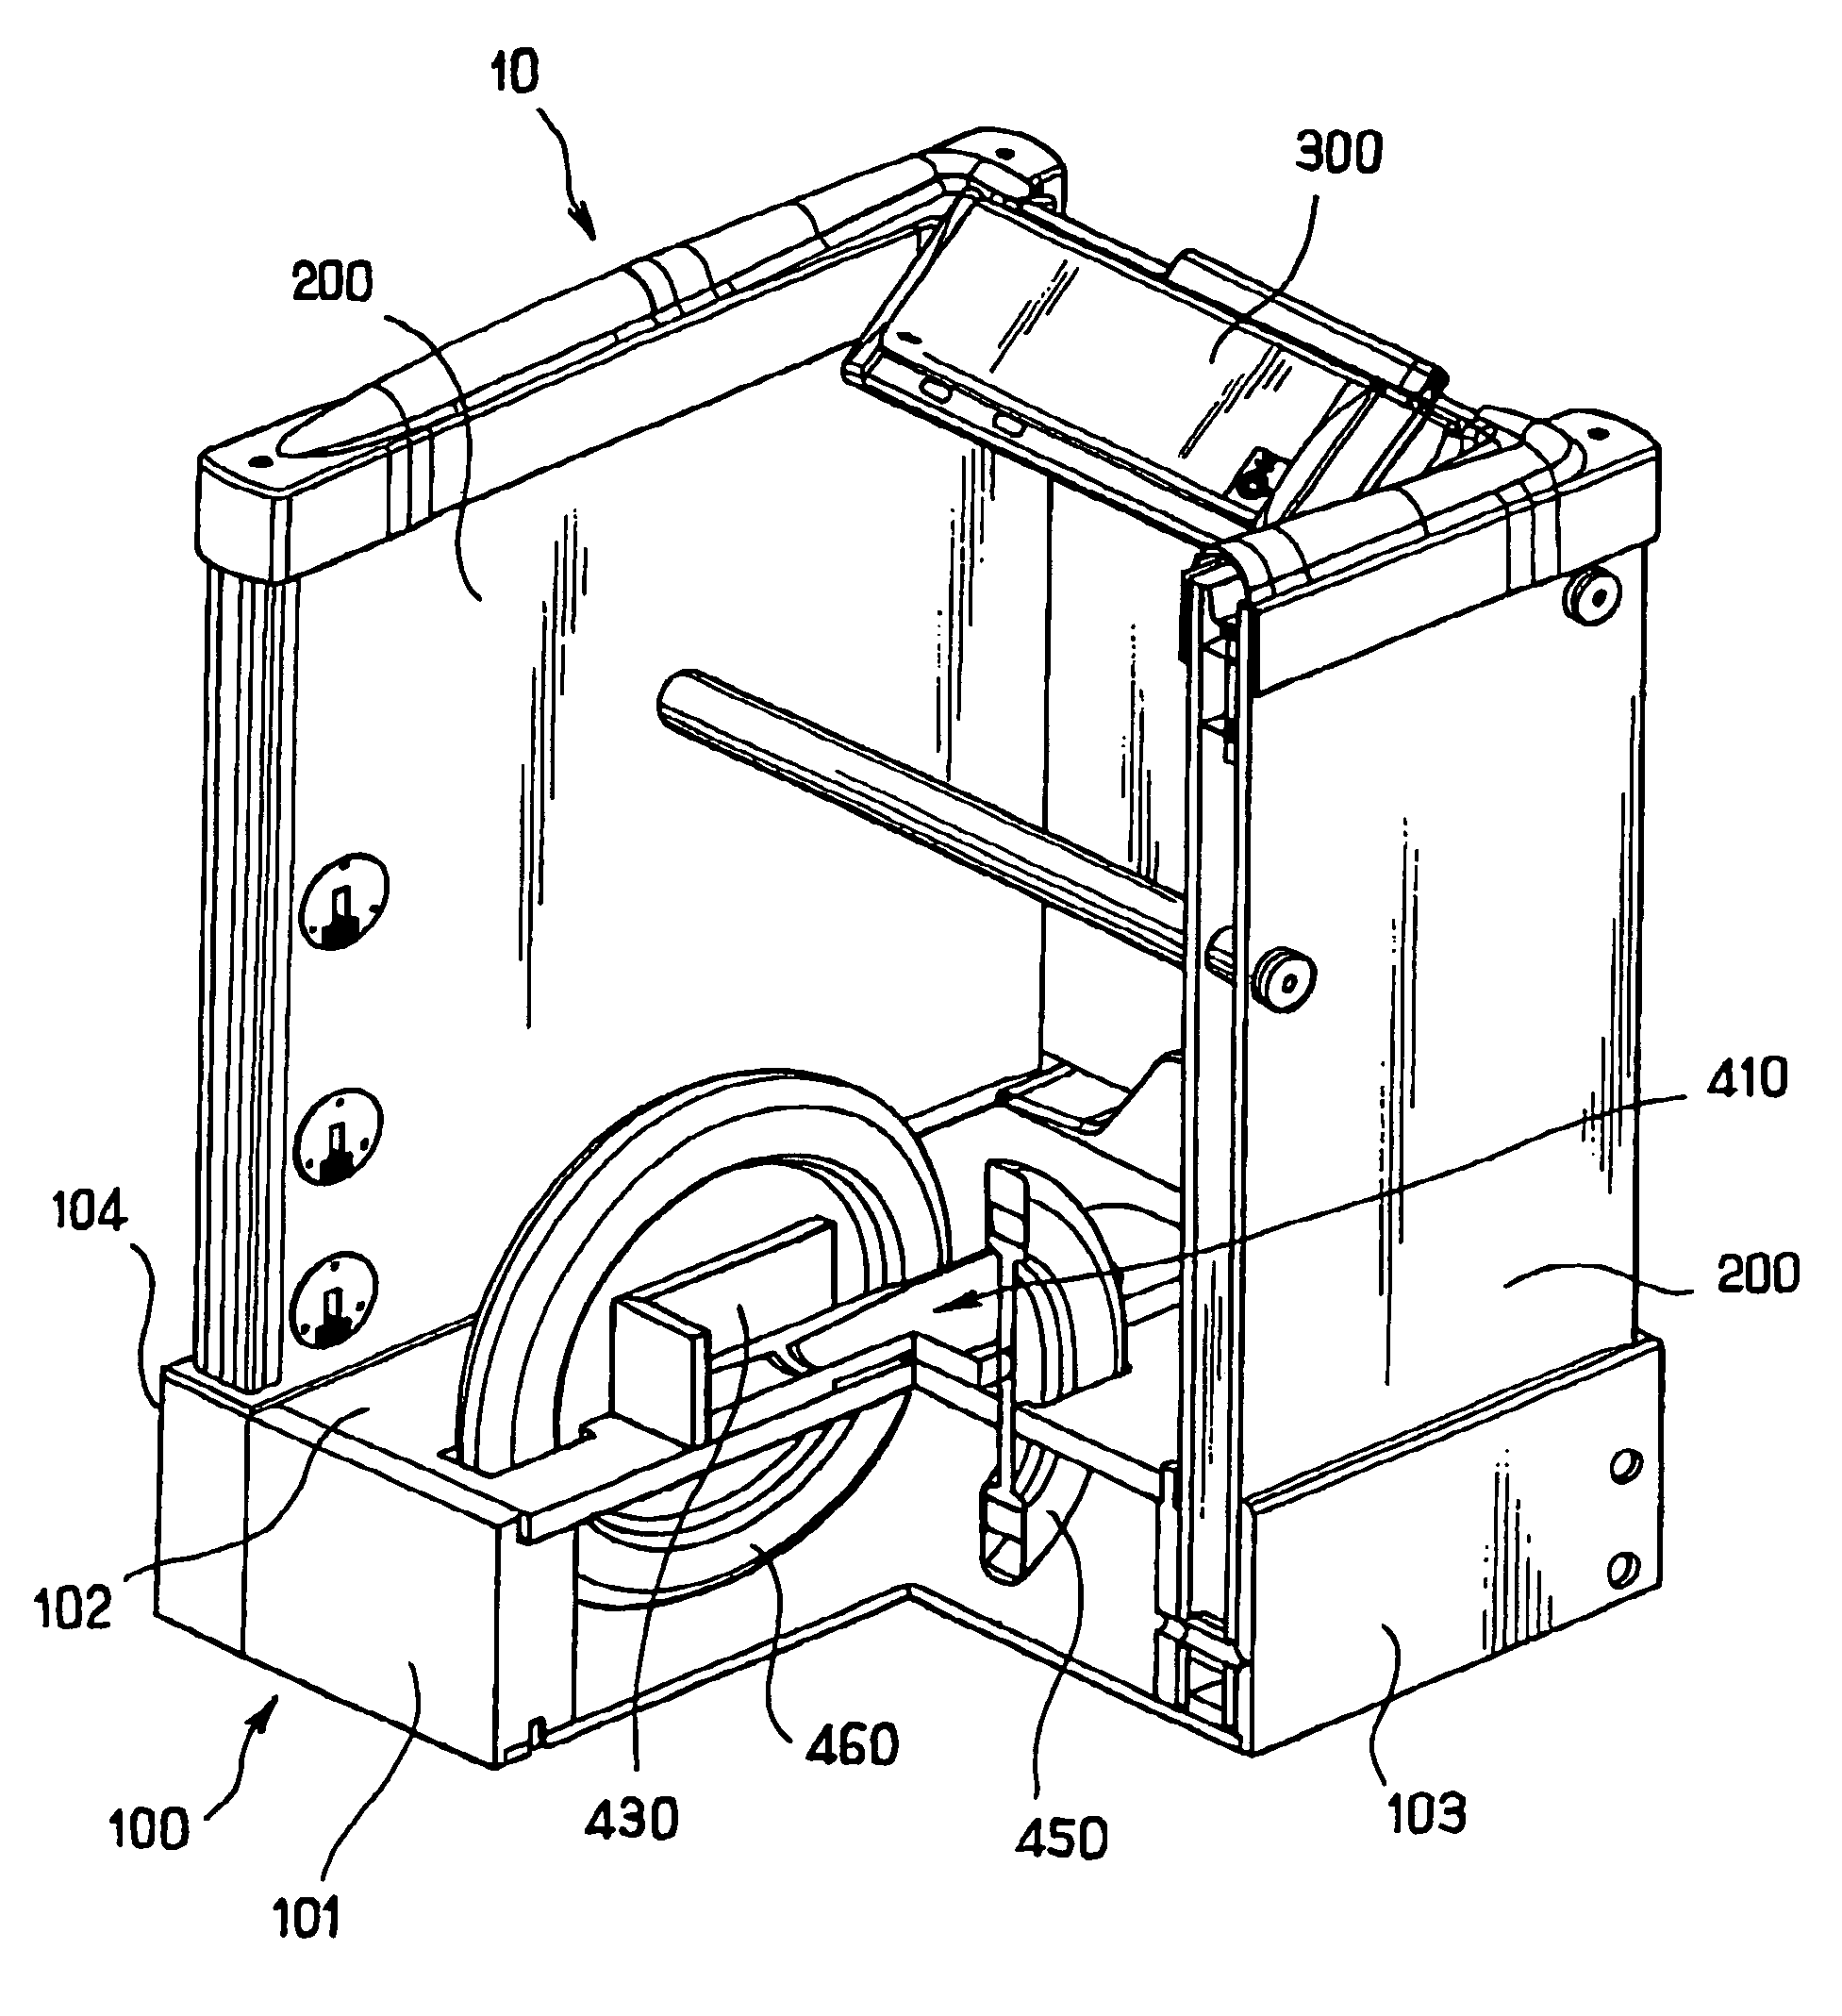 Magnetic resonance detector for detecting non-authorized materials in footwear